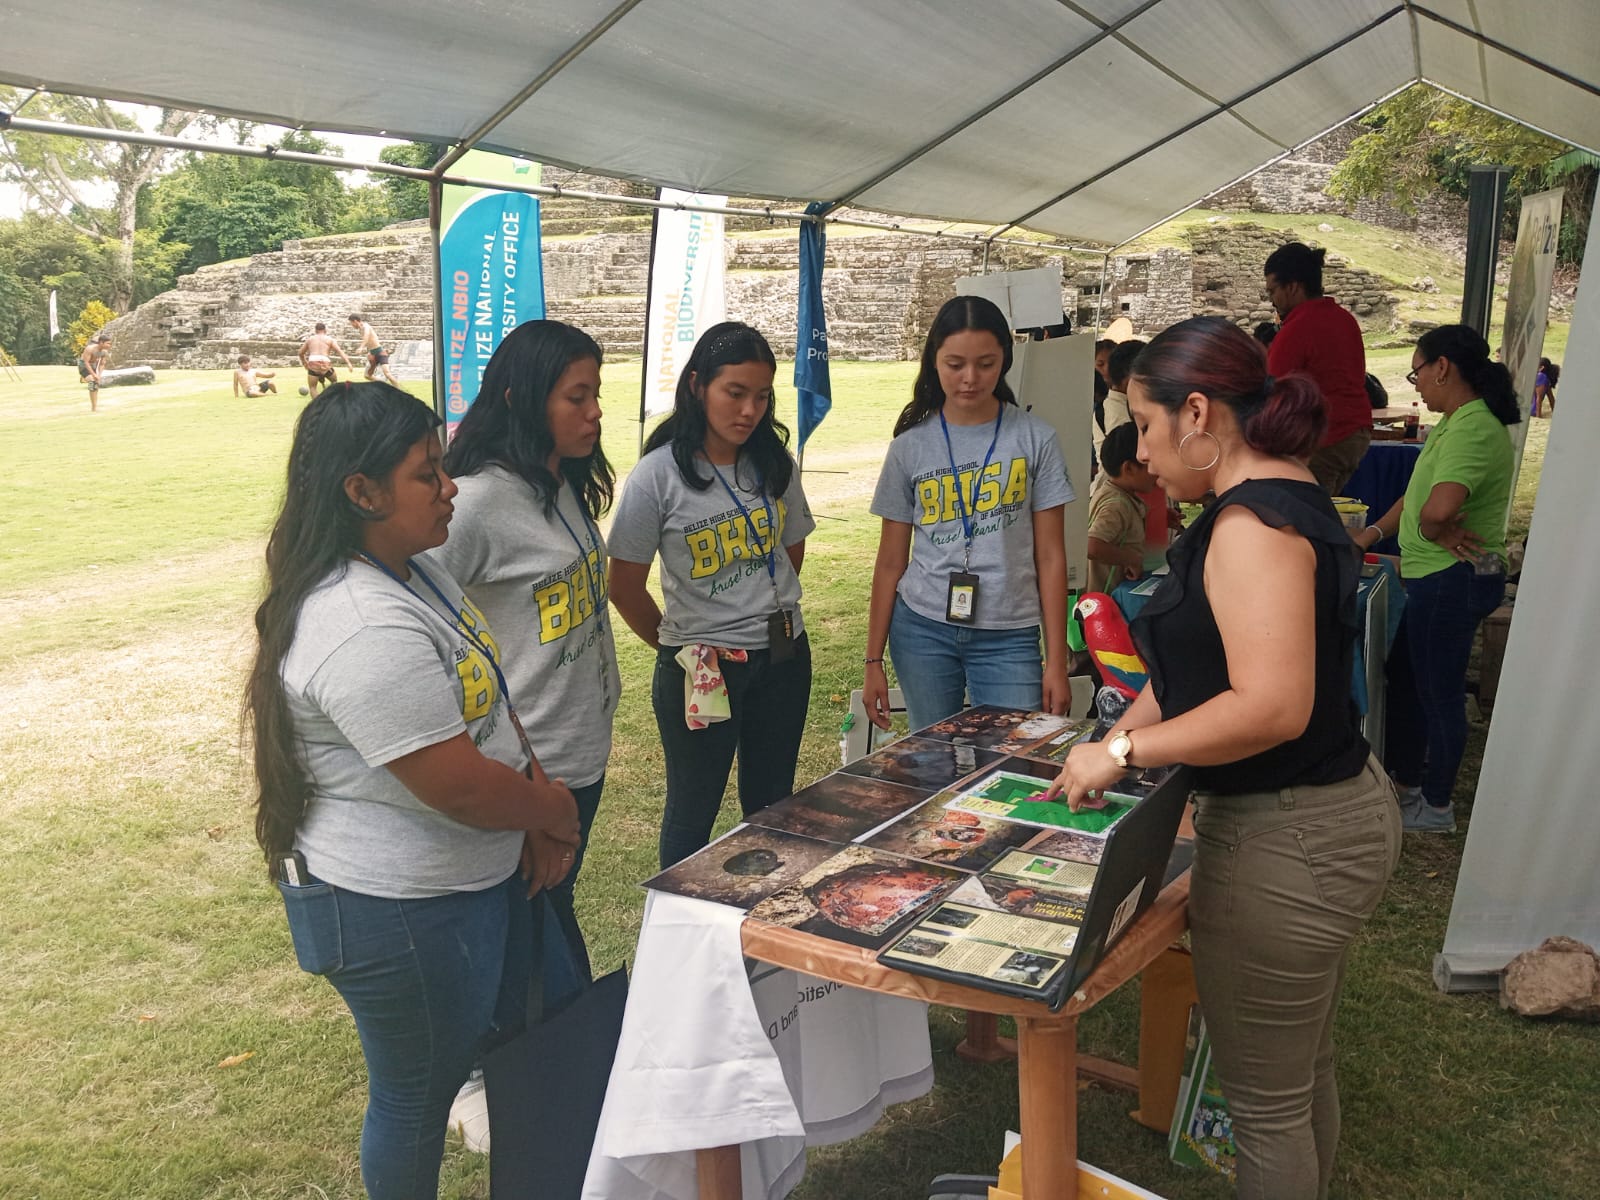 International Archaeology Day was celebrated at Lamanai Archaeological Reserve.